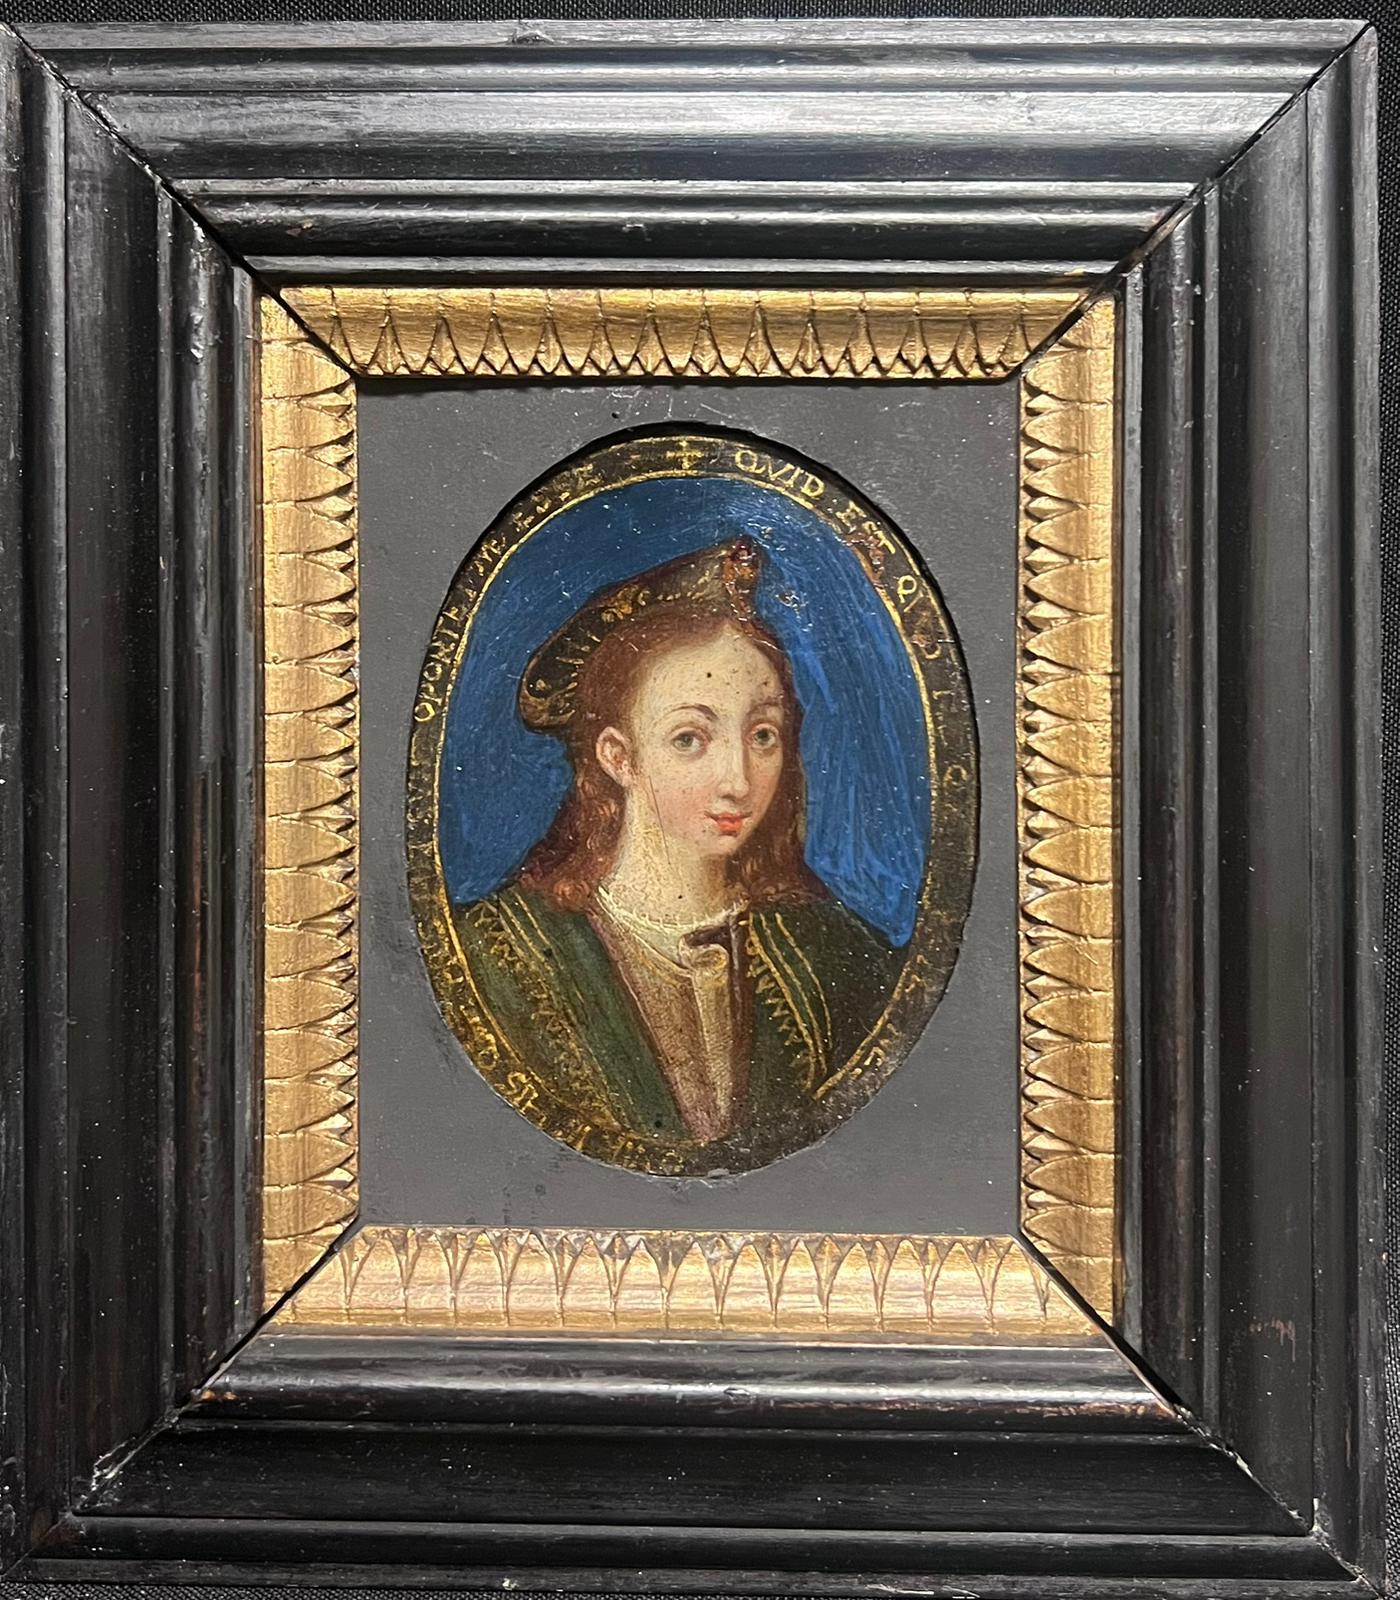 Portrait of a Lady
Italian Old Master, 17th century
oil on copper, framed
framed: 8.75 x 7.75 inches
painting: 5 x 4 inches
provenance: private collection, England
condition: very good and sound condition 